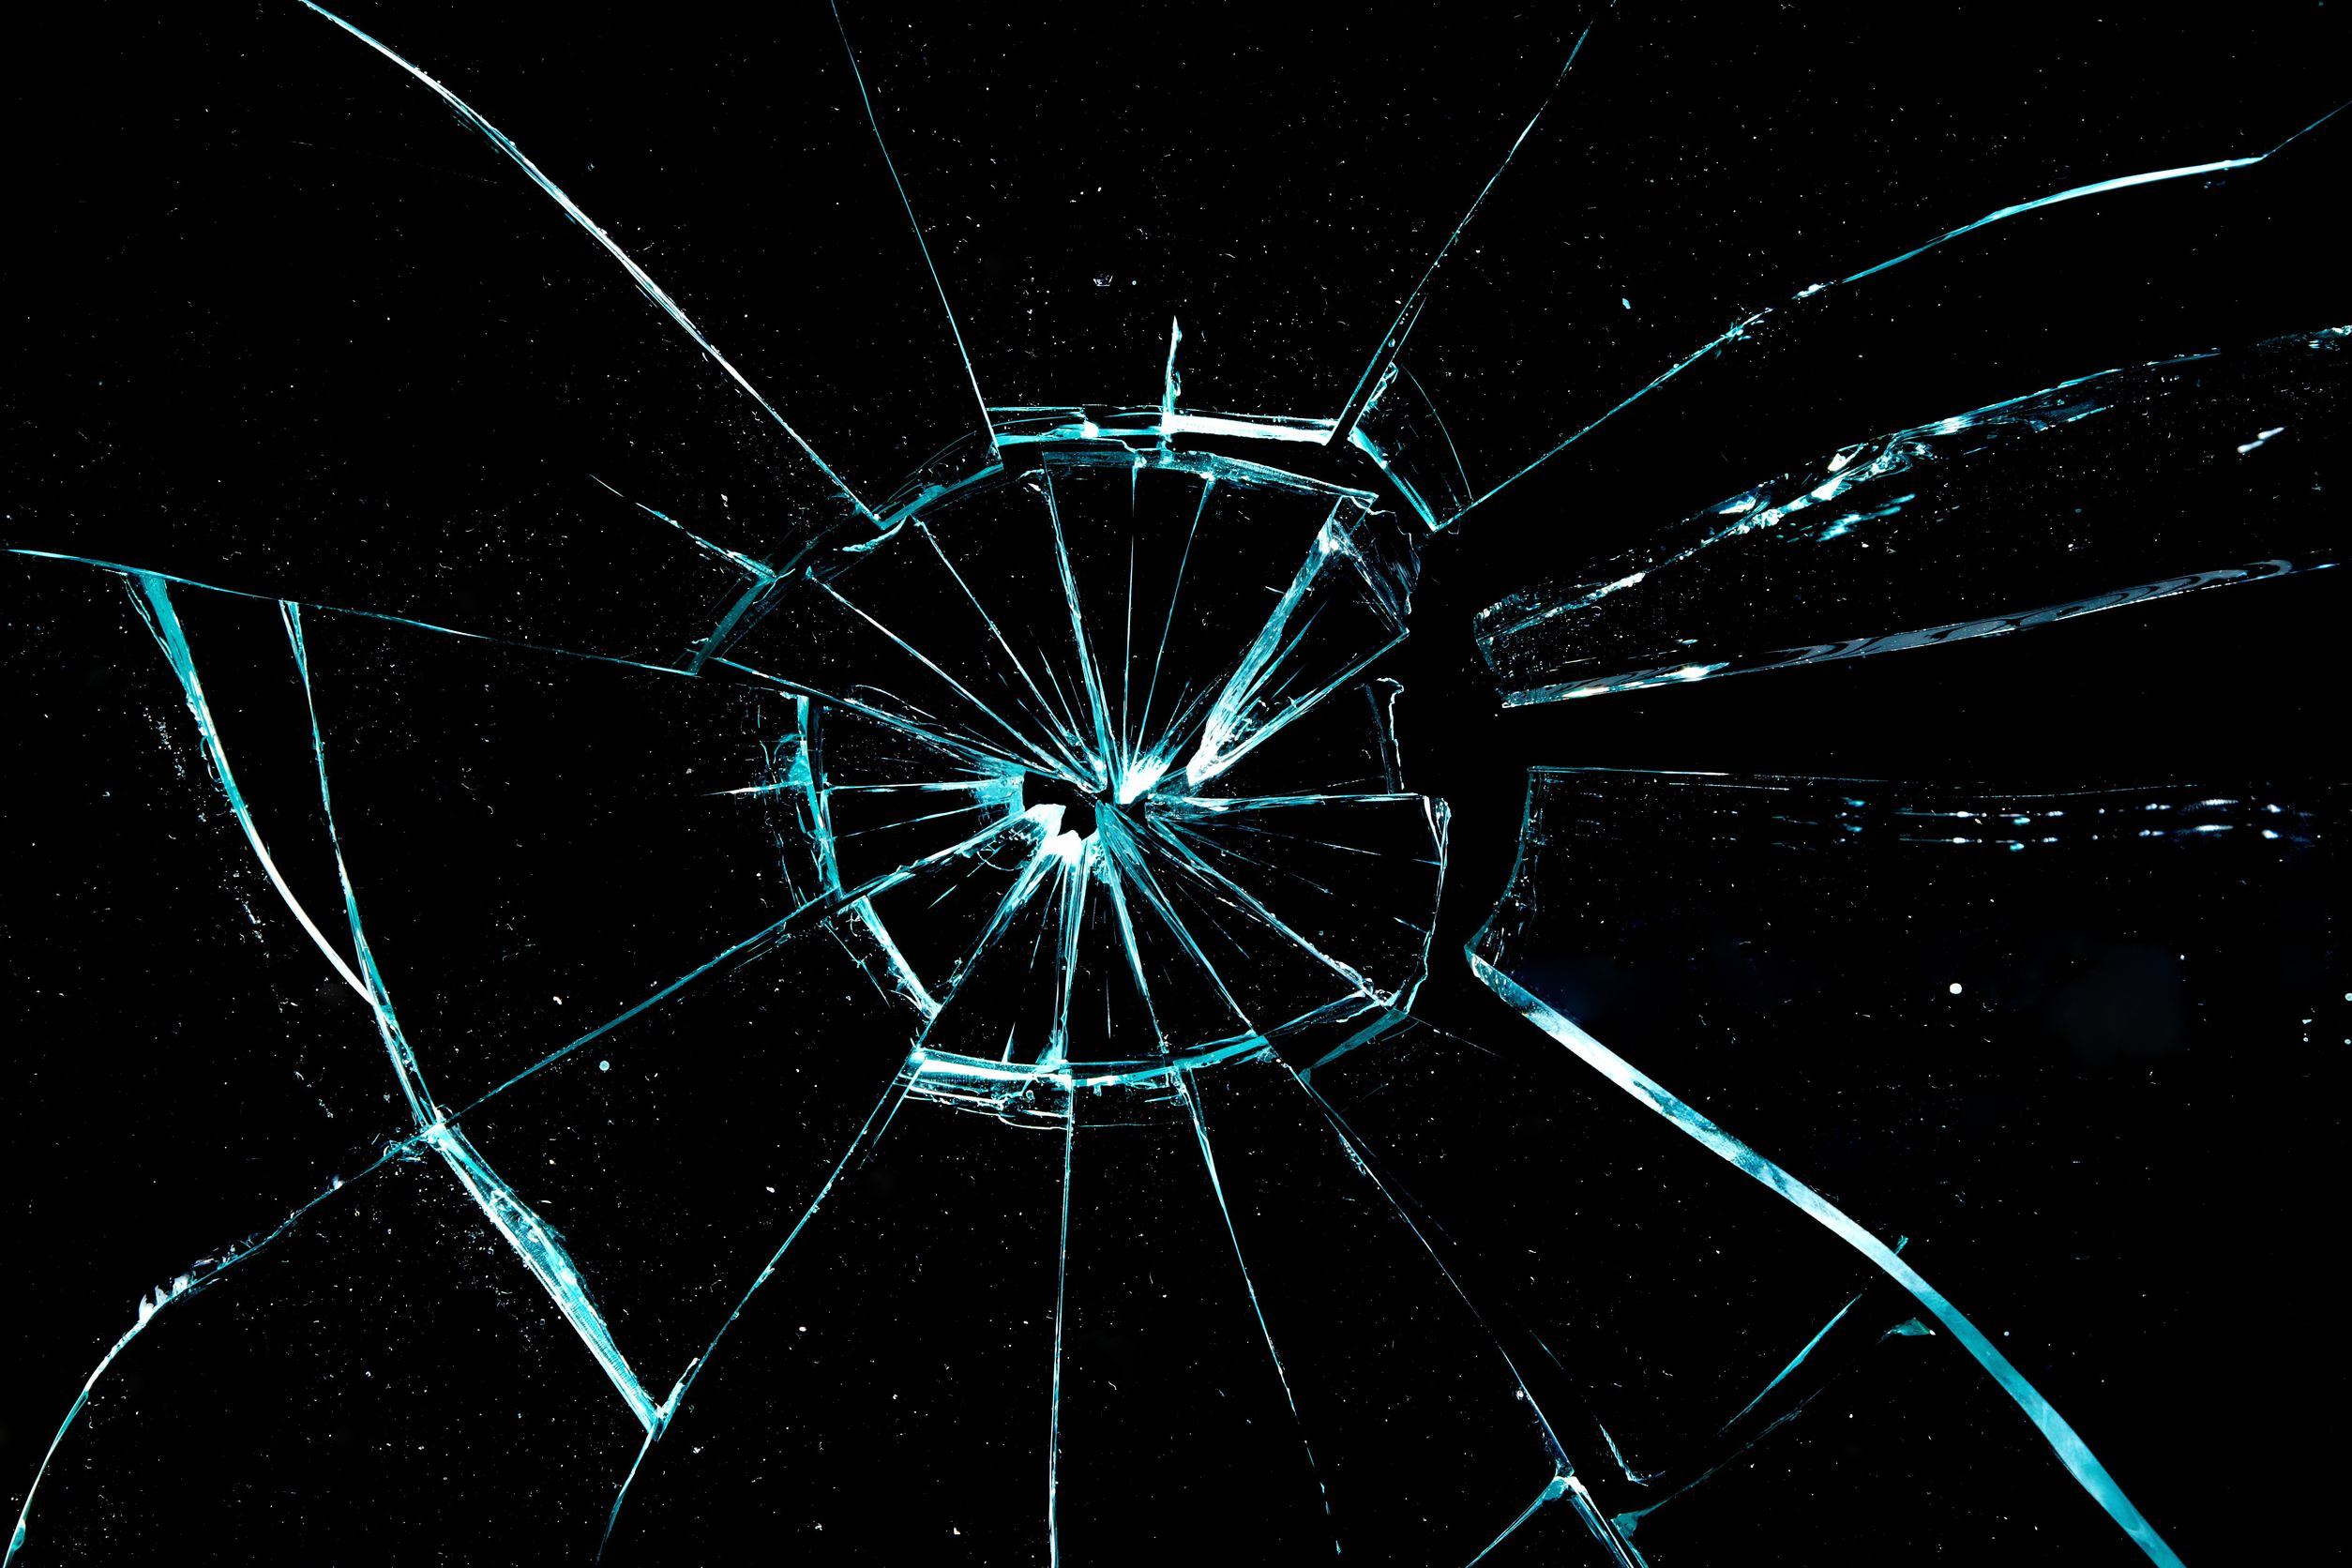 Close-up image of a shattered piece of glass with a spiderweb pattern of cracks radiating from the center, set against a dark background. | Can you drive with a cracked windshield?